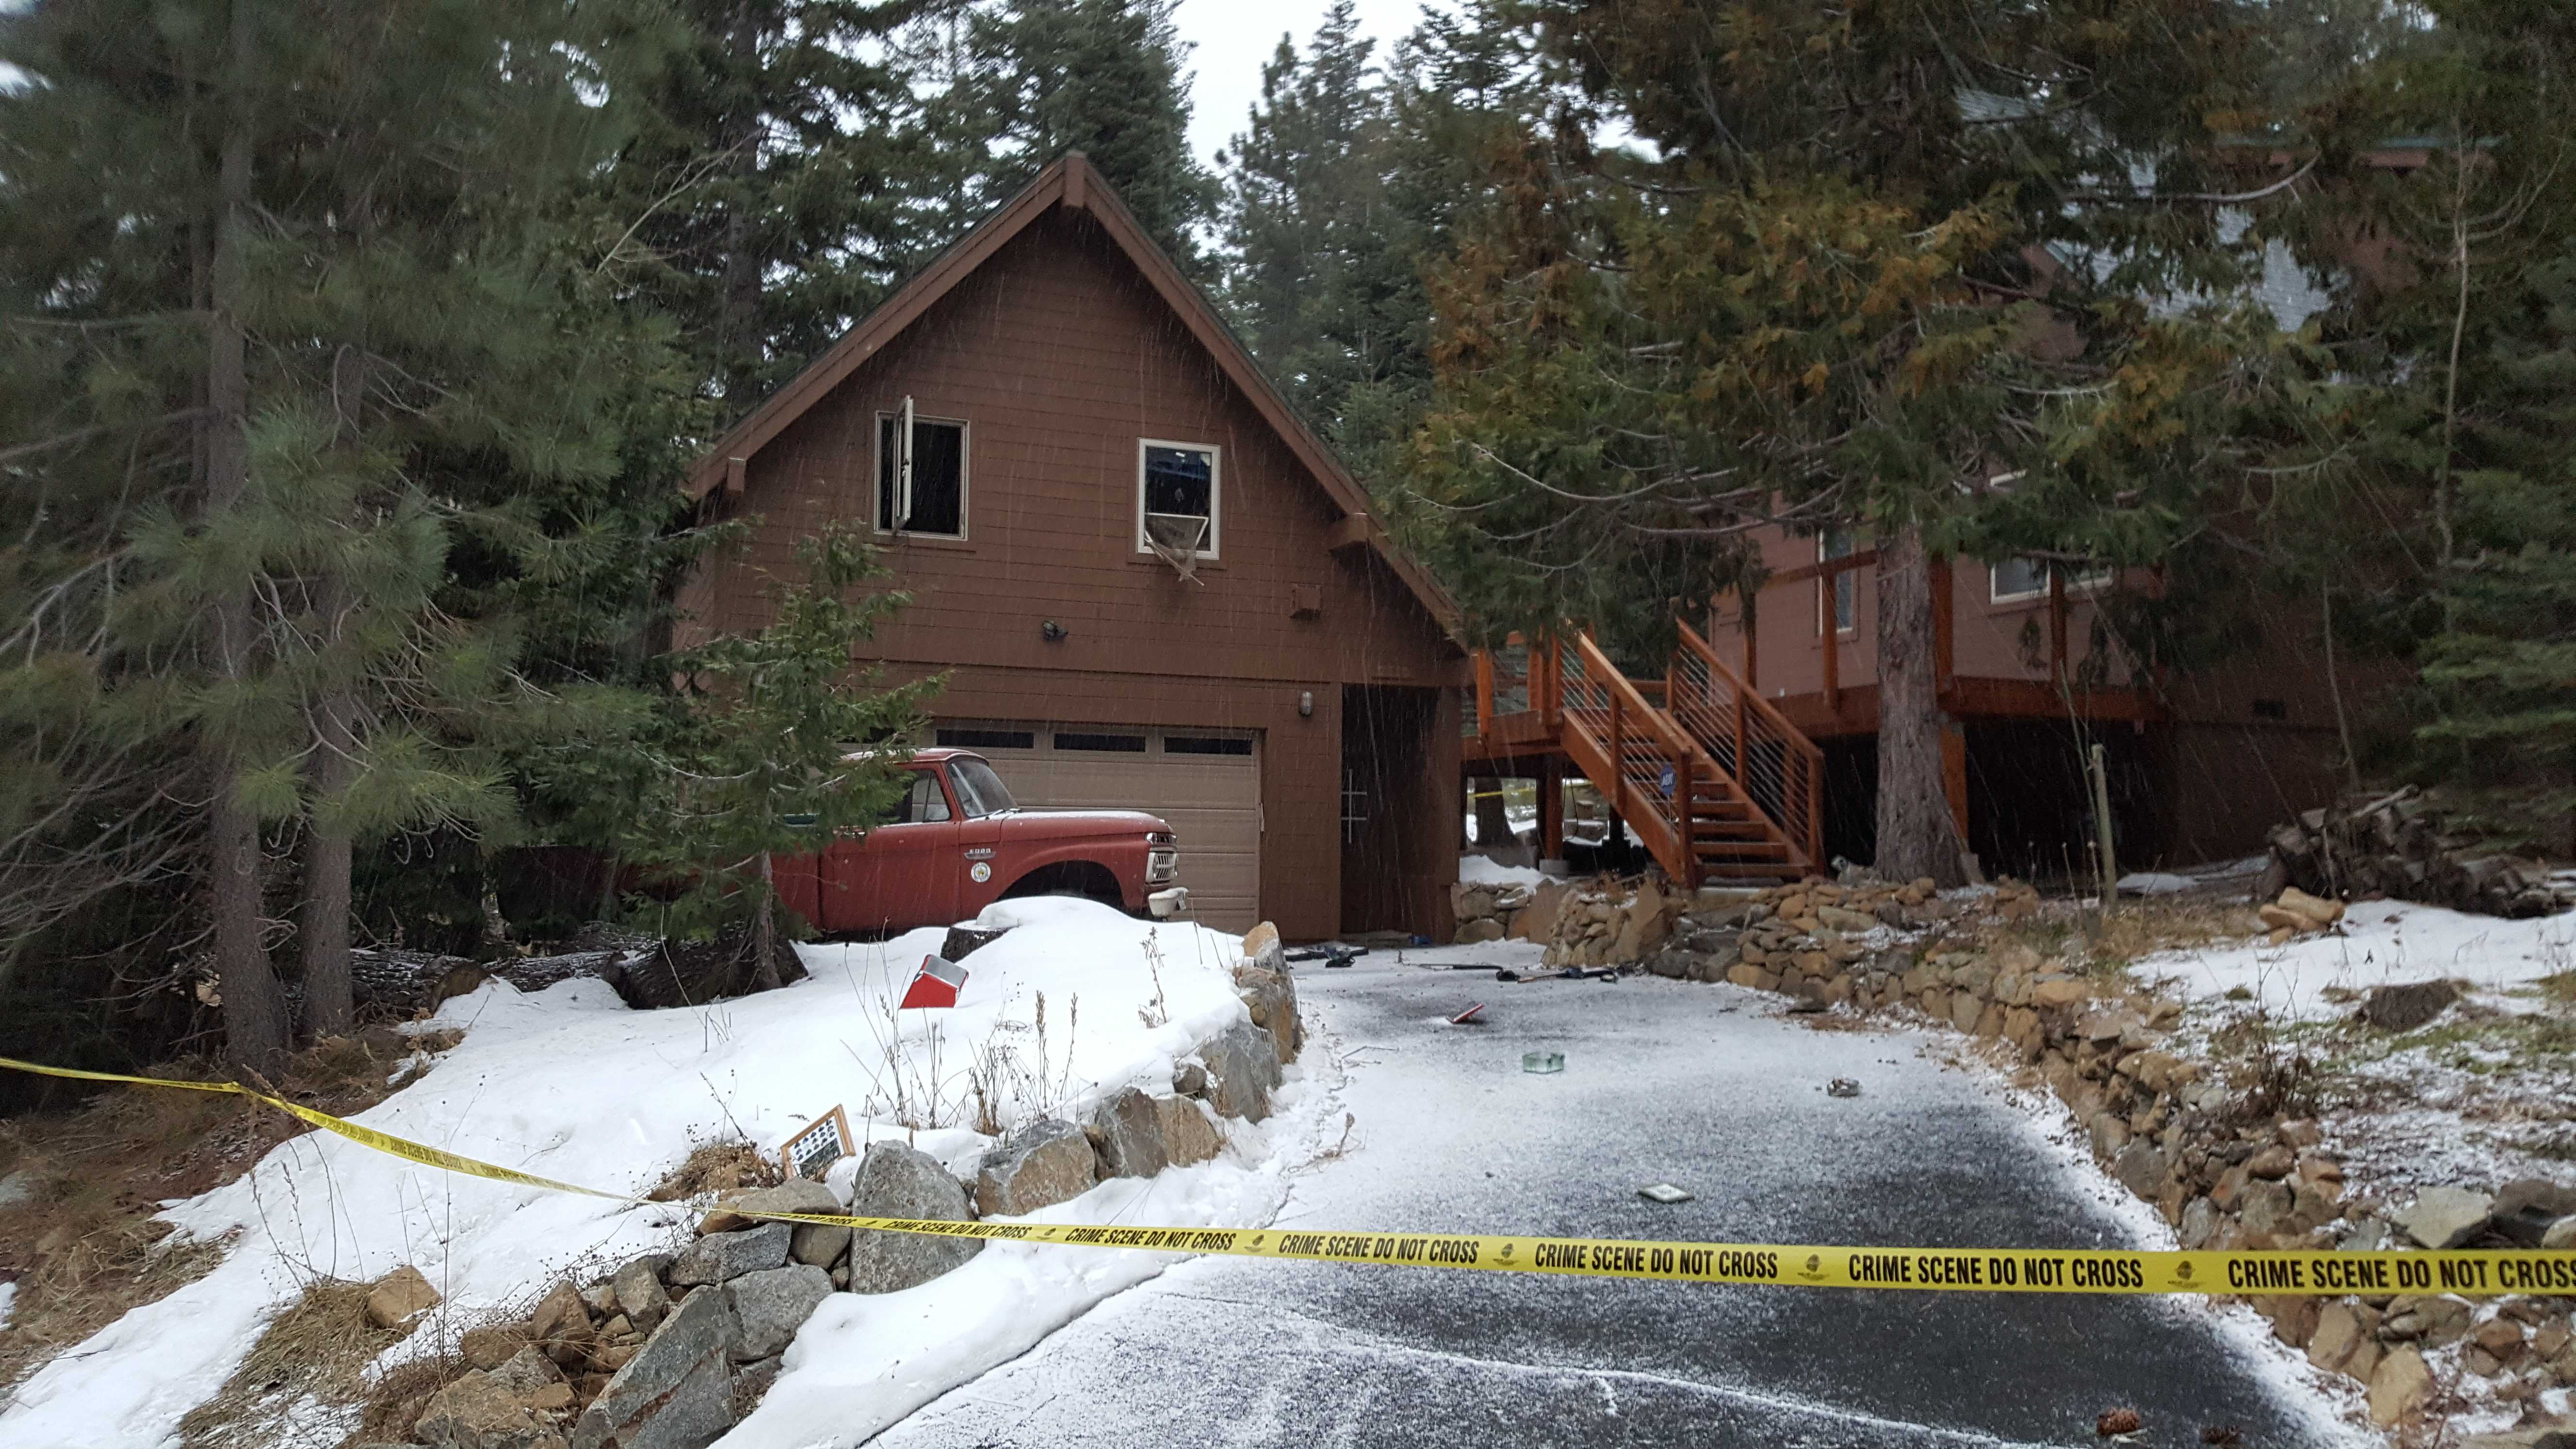 Body found in Tahoe-area home; arrest made at Homewood Ski Resort